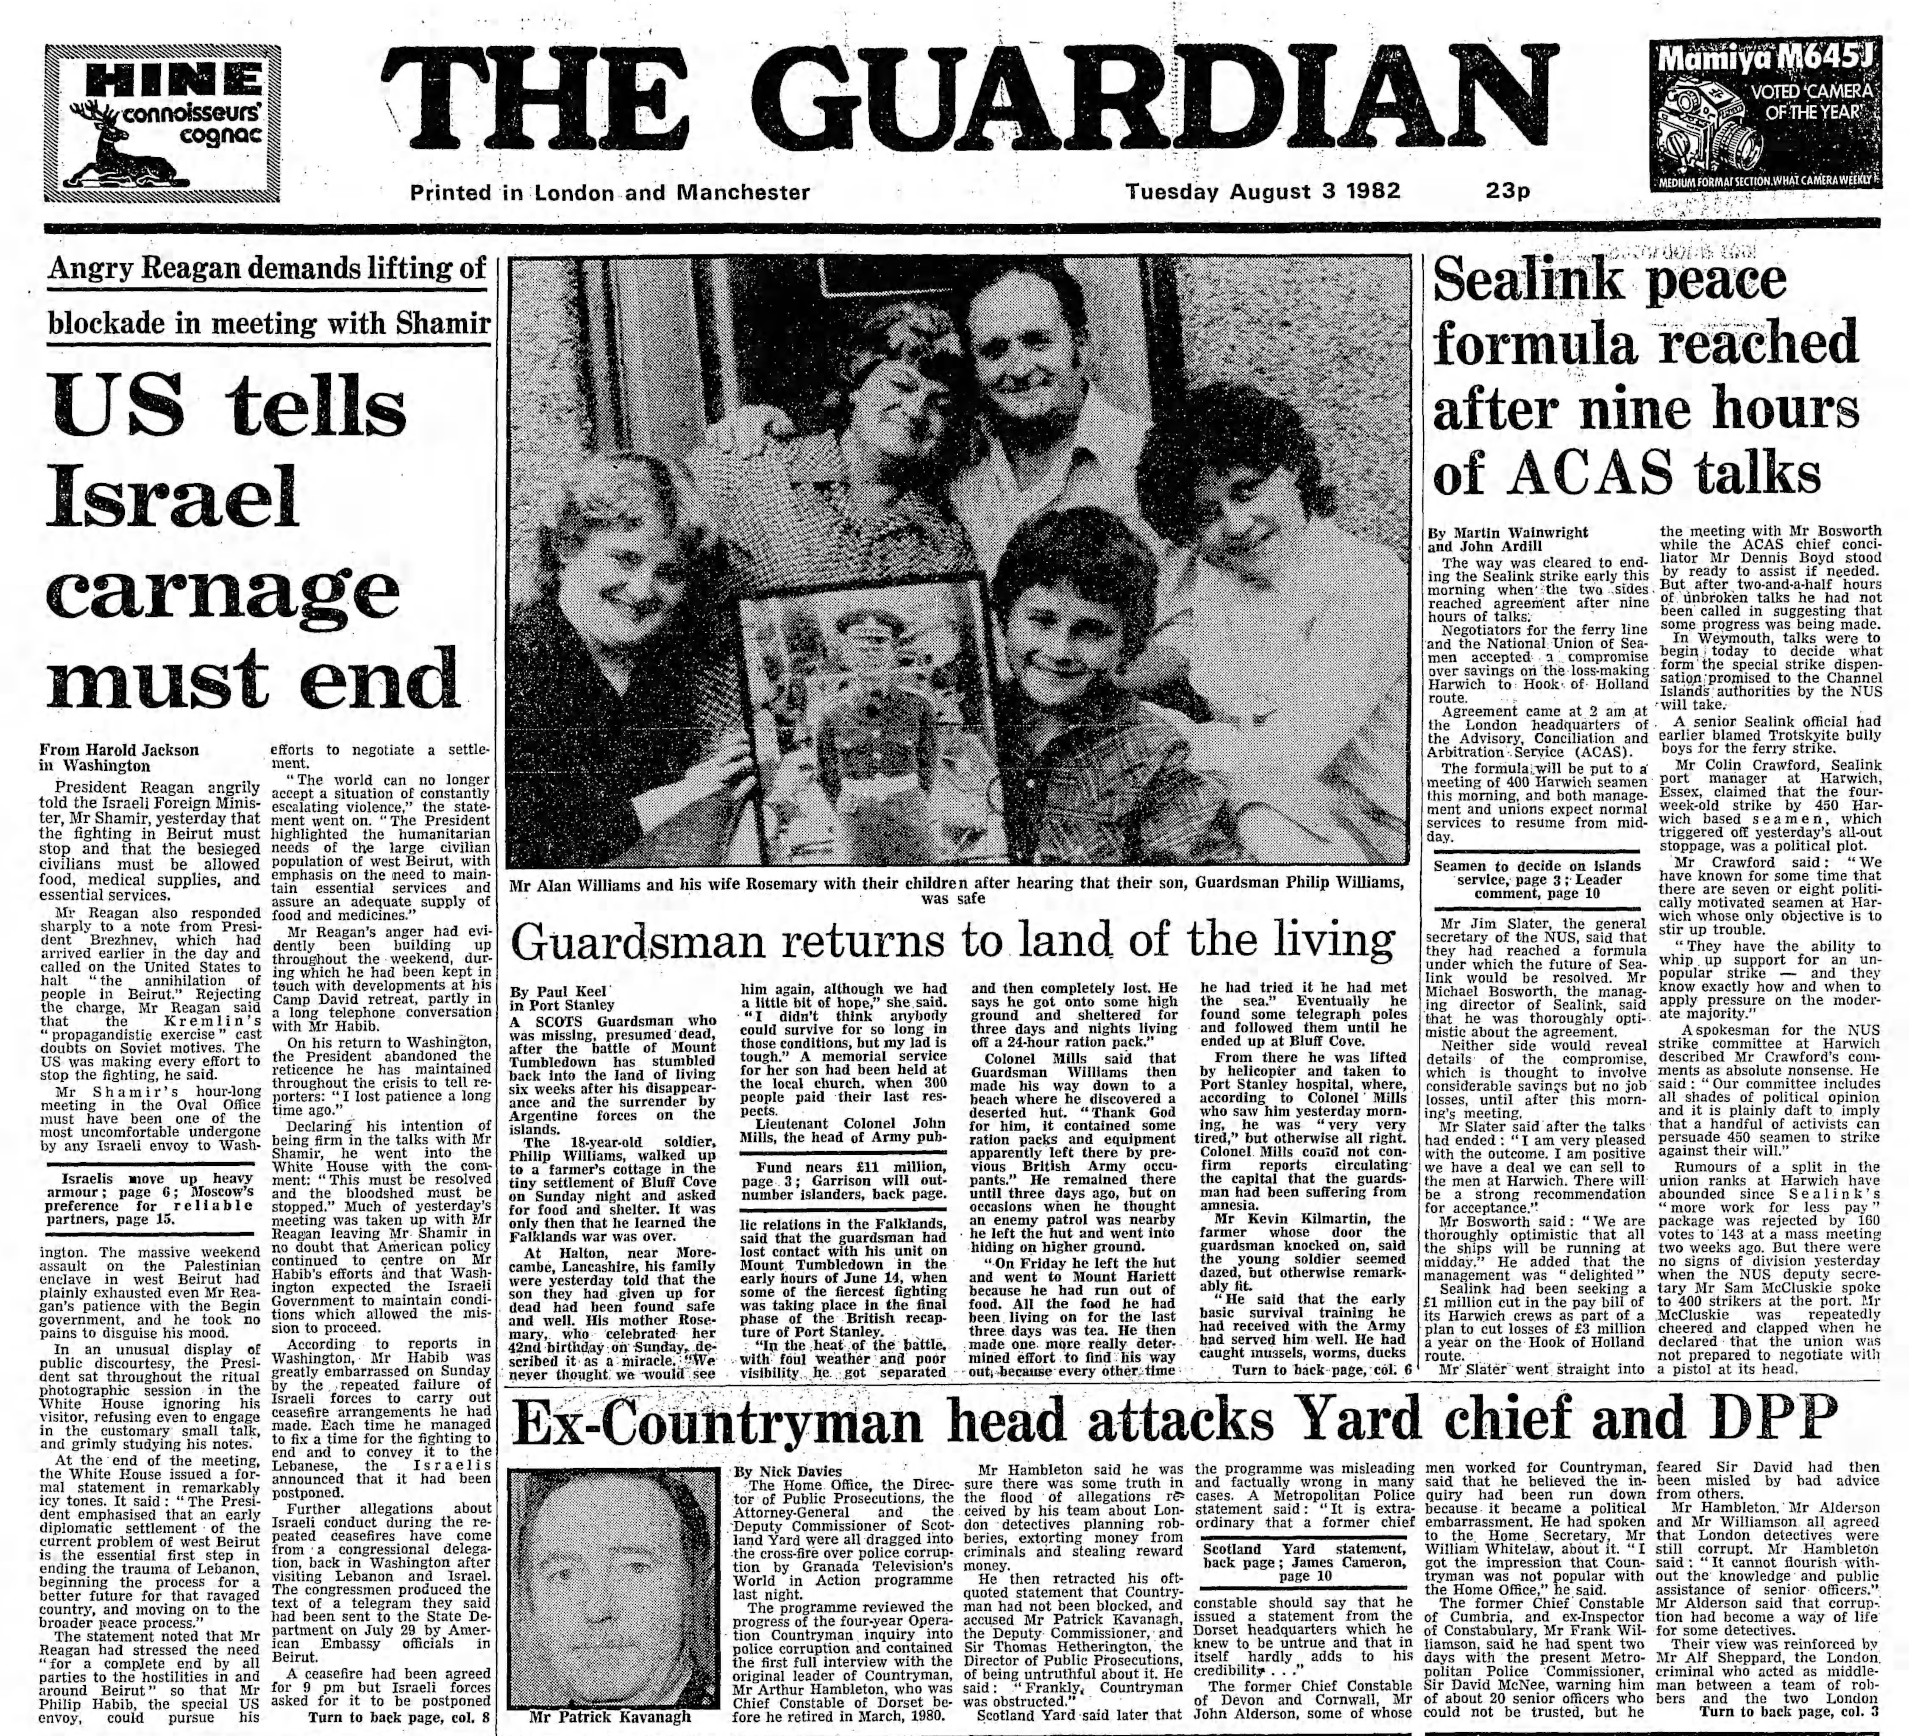 Full front page of The Guardian Tuesday August 3rd 1982